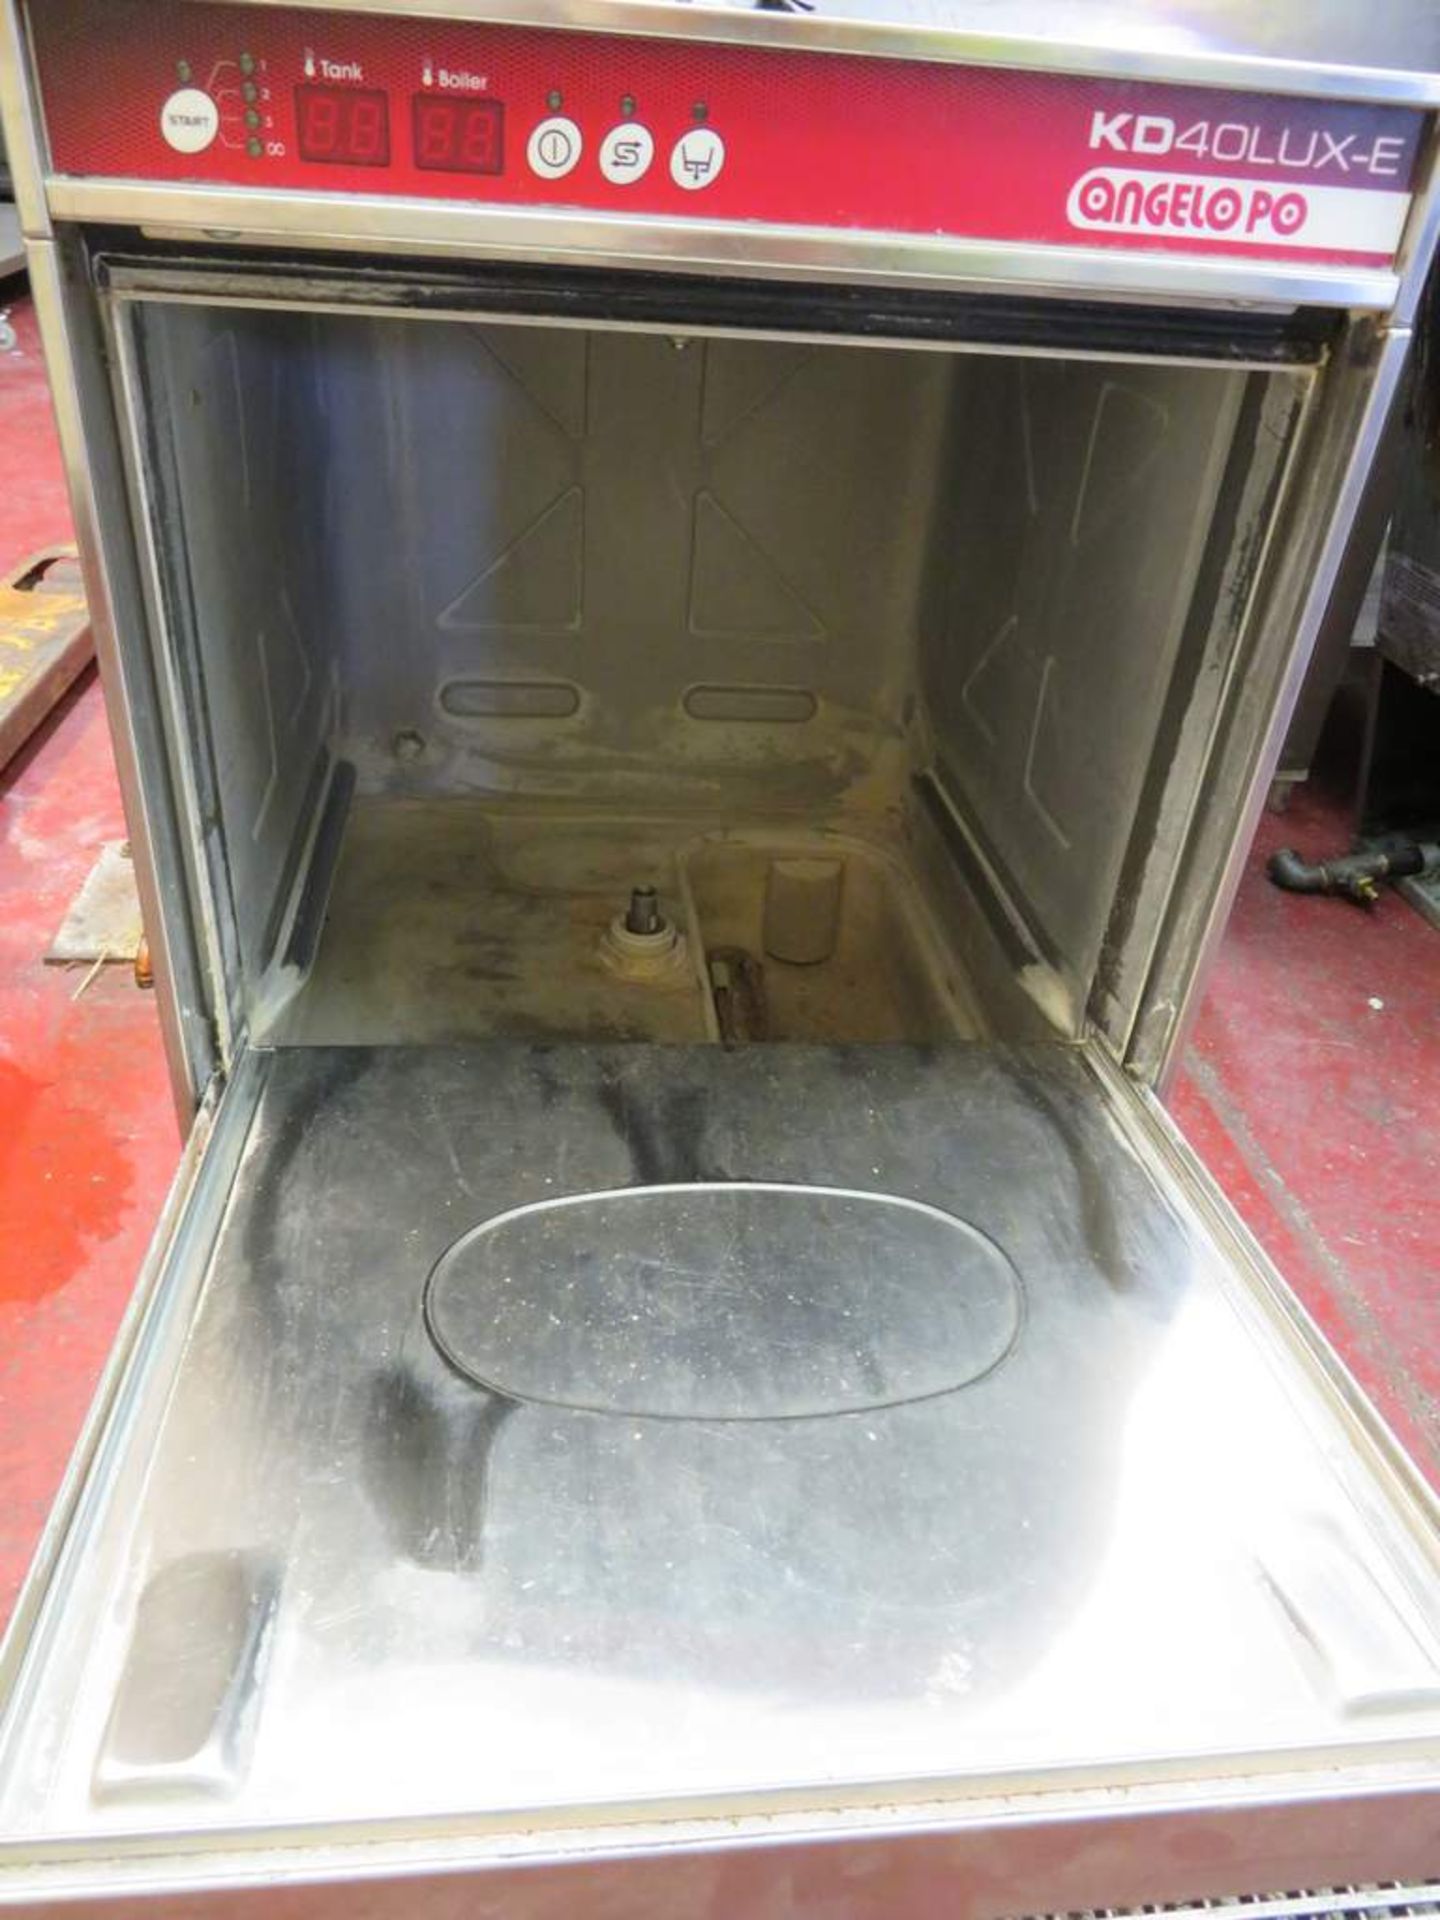 Angelo Po Stainless steel undercounter glass washer - Image 2 of 2